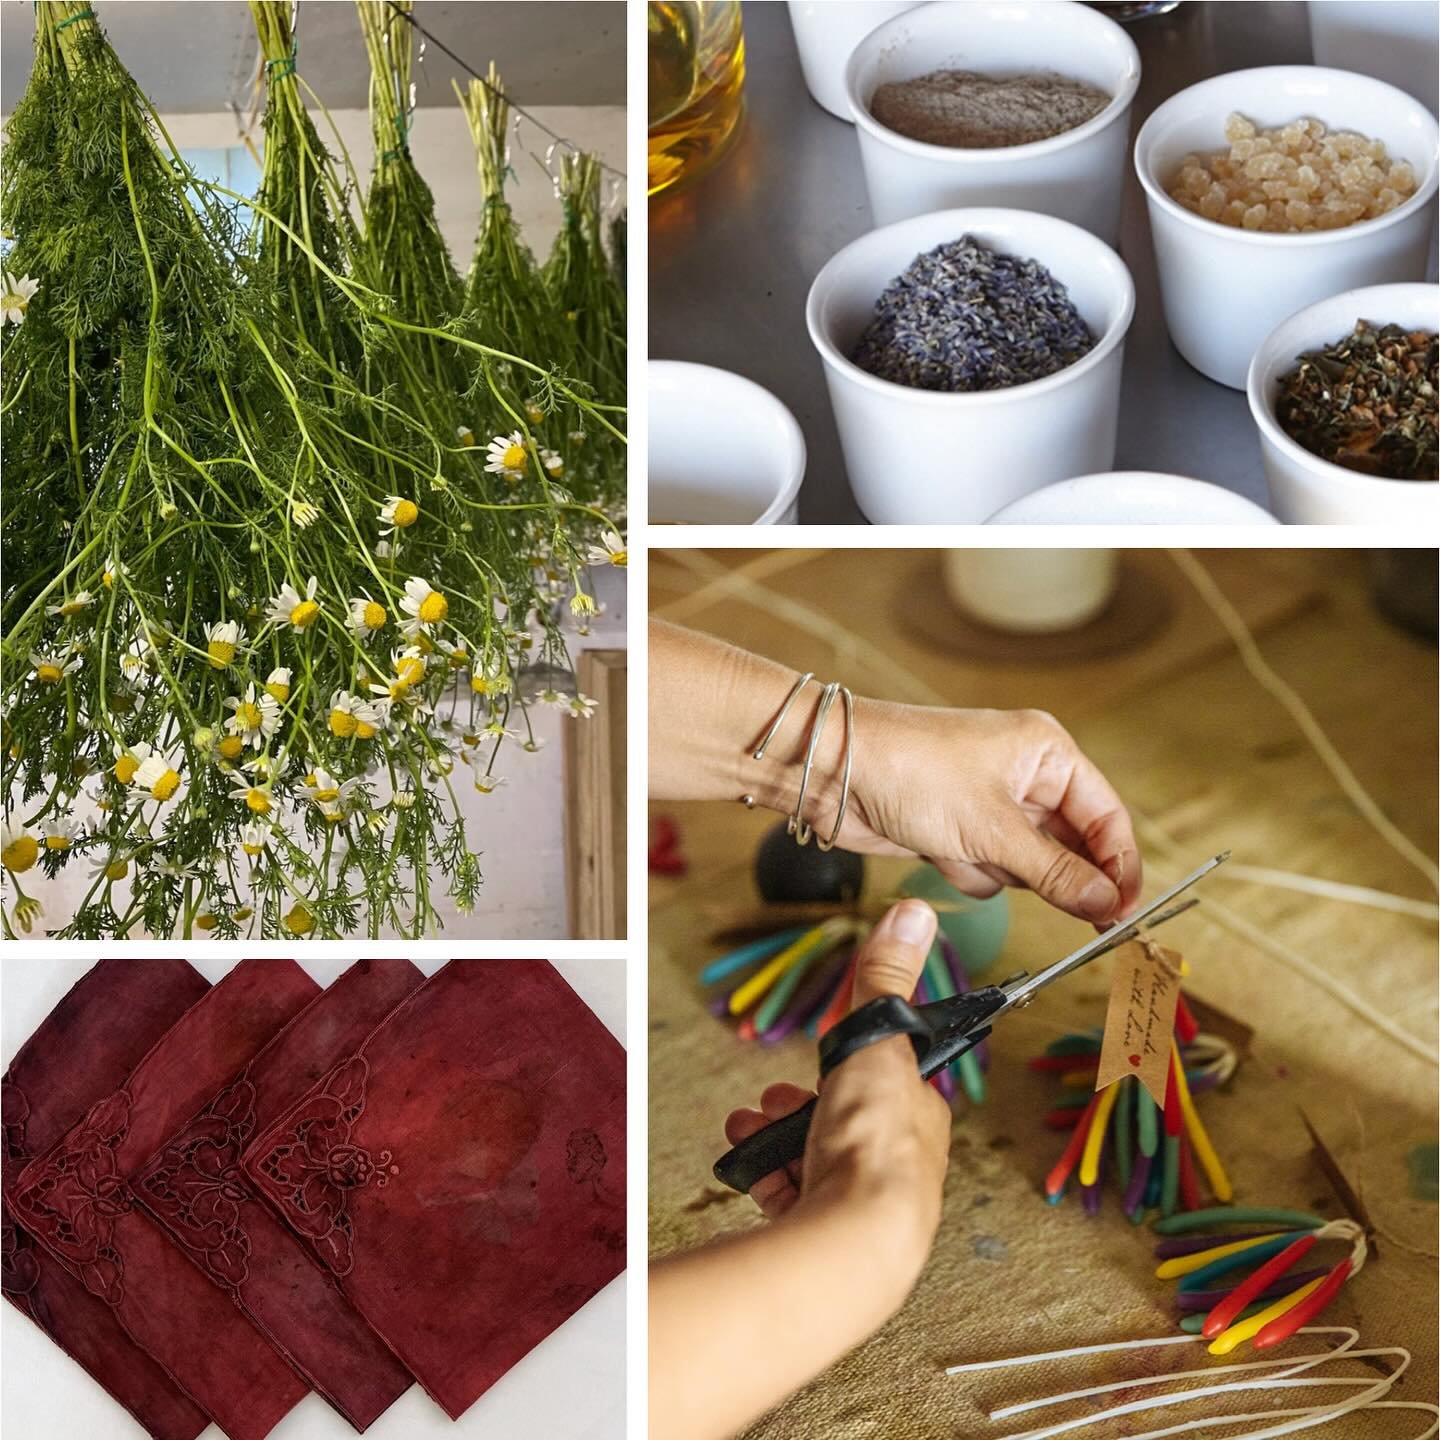 You&rsquo;re invited &ndash; bask in the inspiring talent of over 50 regional makers, farmers, food purveyors, and creatives joining us at #gWorksHEIRLOOM 2024!
☀️
Saturday, May 11th, 9am-10am ticketed shopping preview of this year&rsquo;s HEIRLOOM e